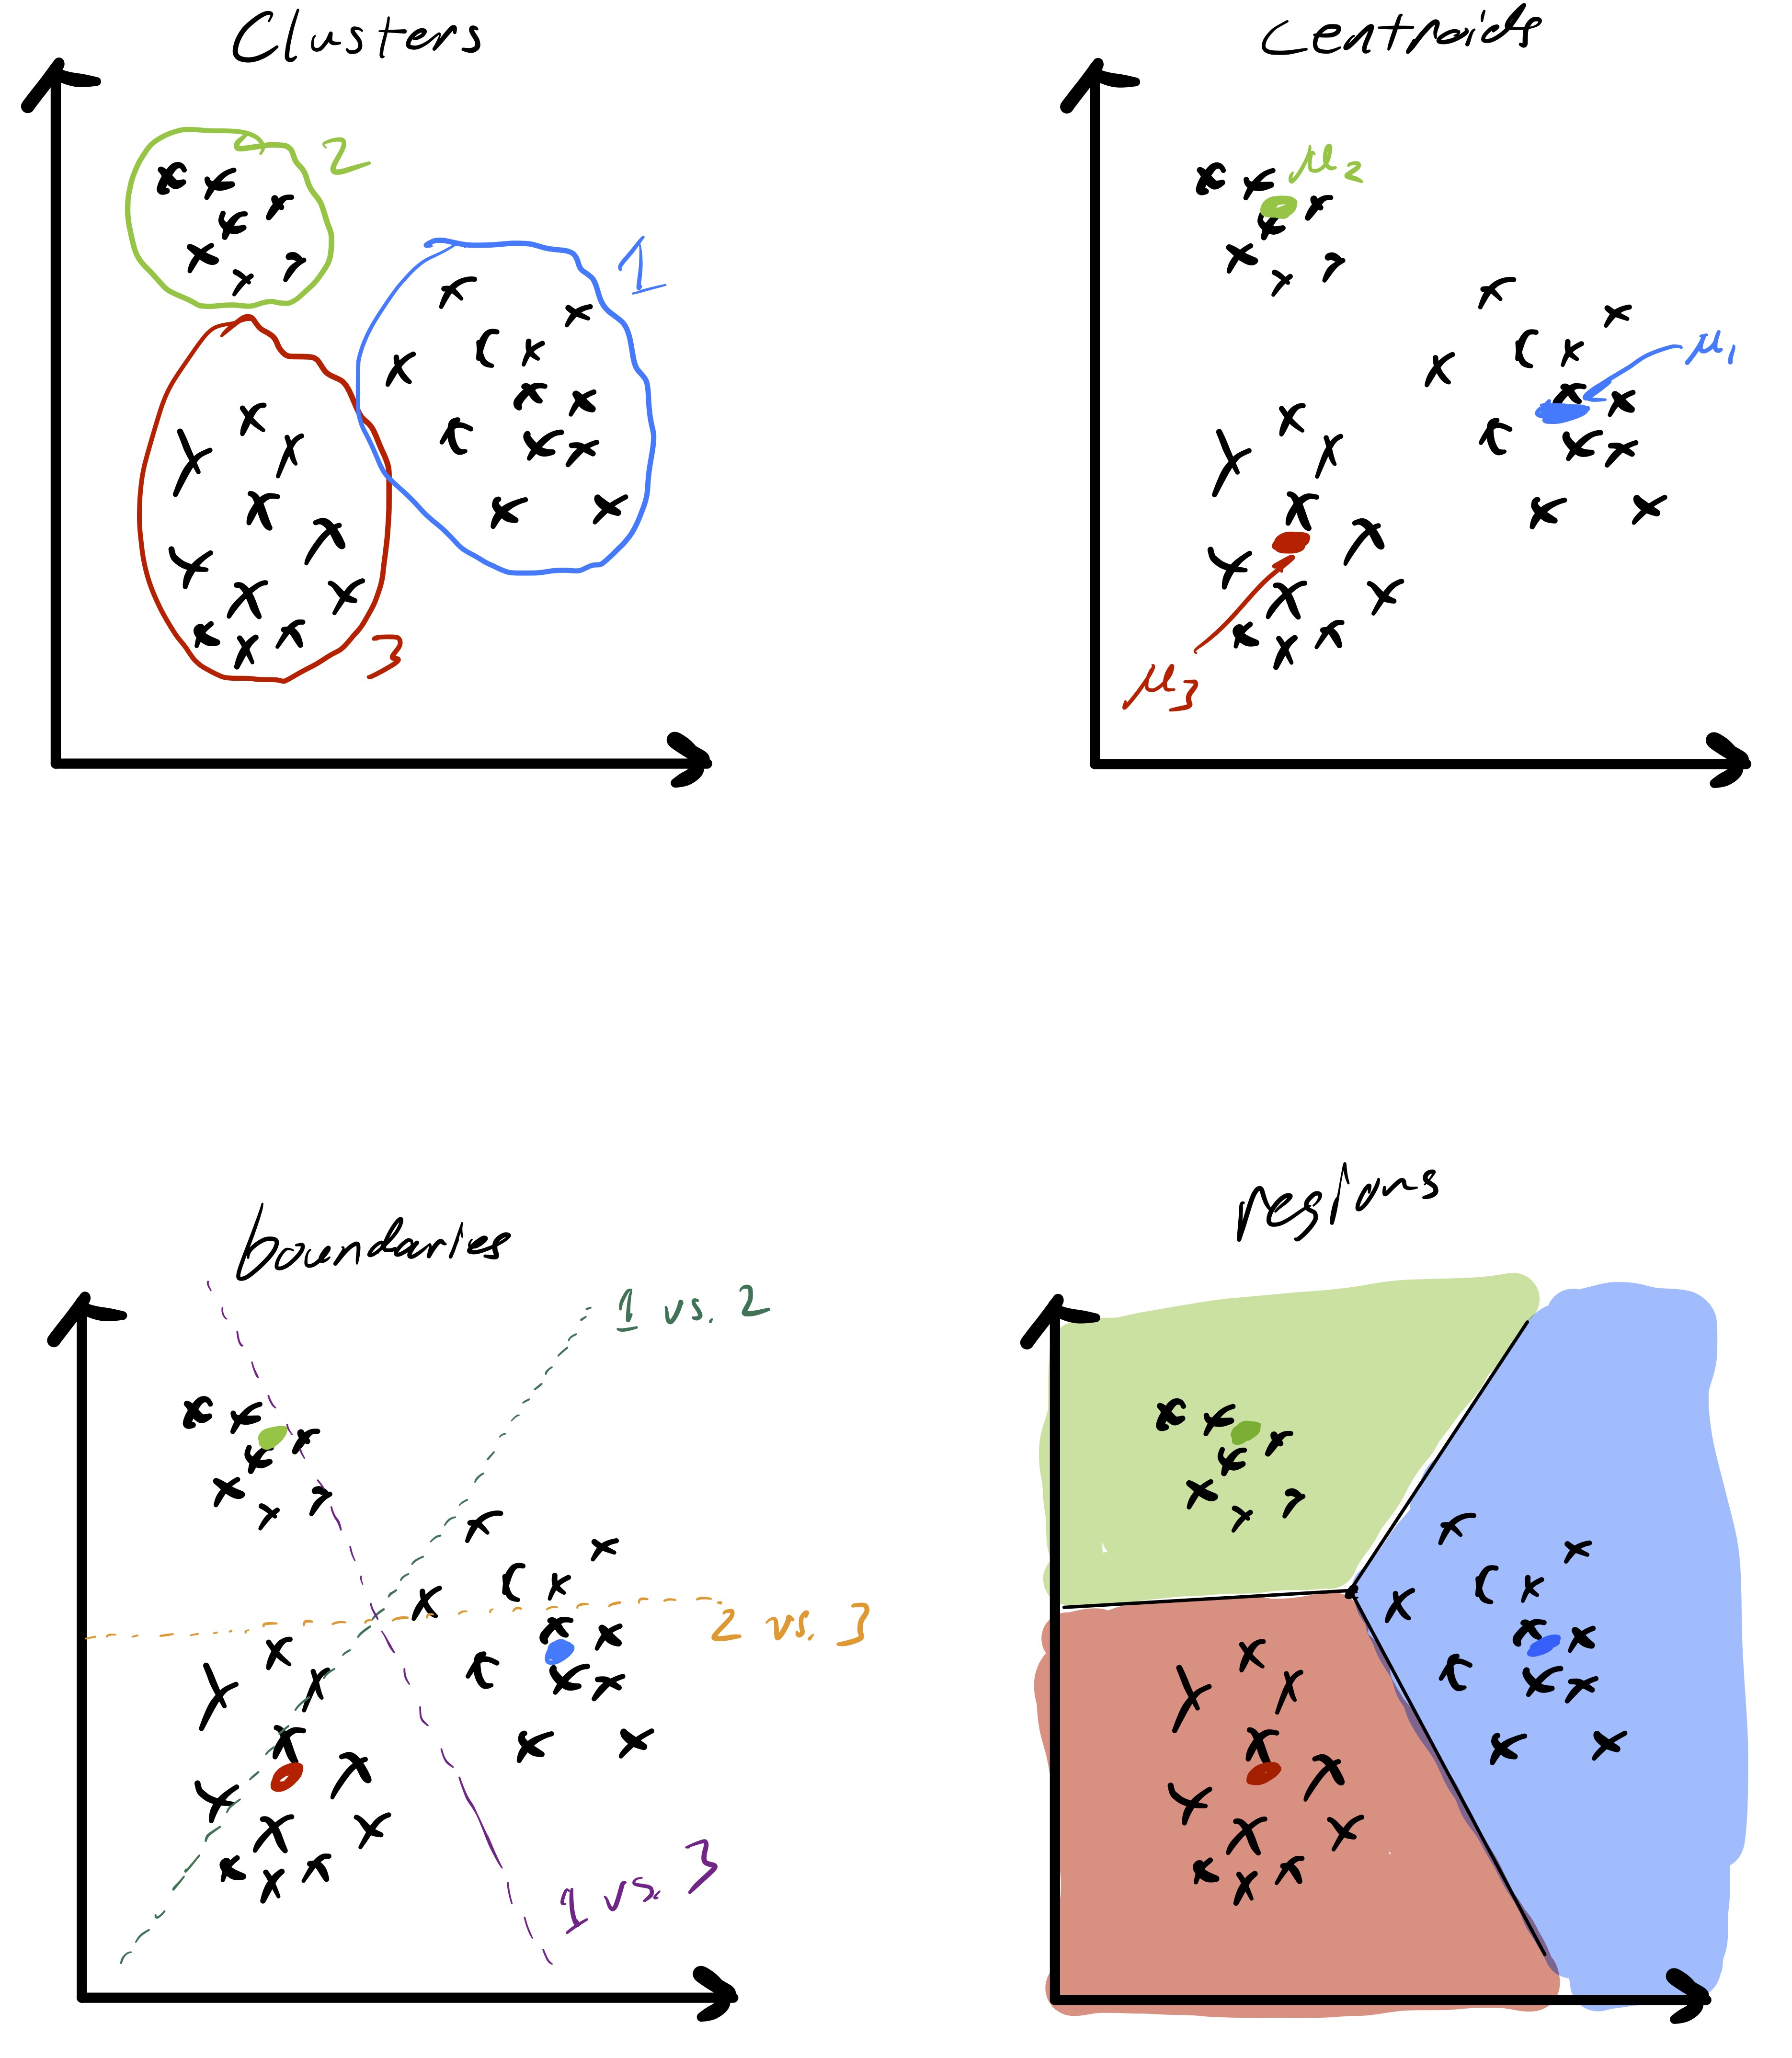 Figure 7: Cluster partition boundaries as determined by k-means clustering—they form a Voronoi tessellation of space based on the cluster centroids.